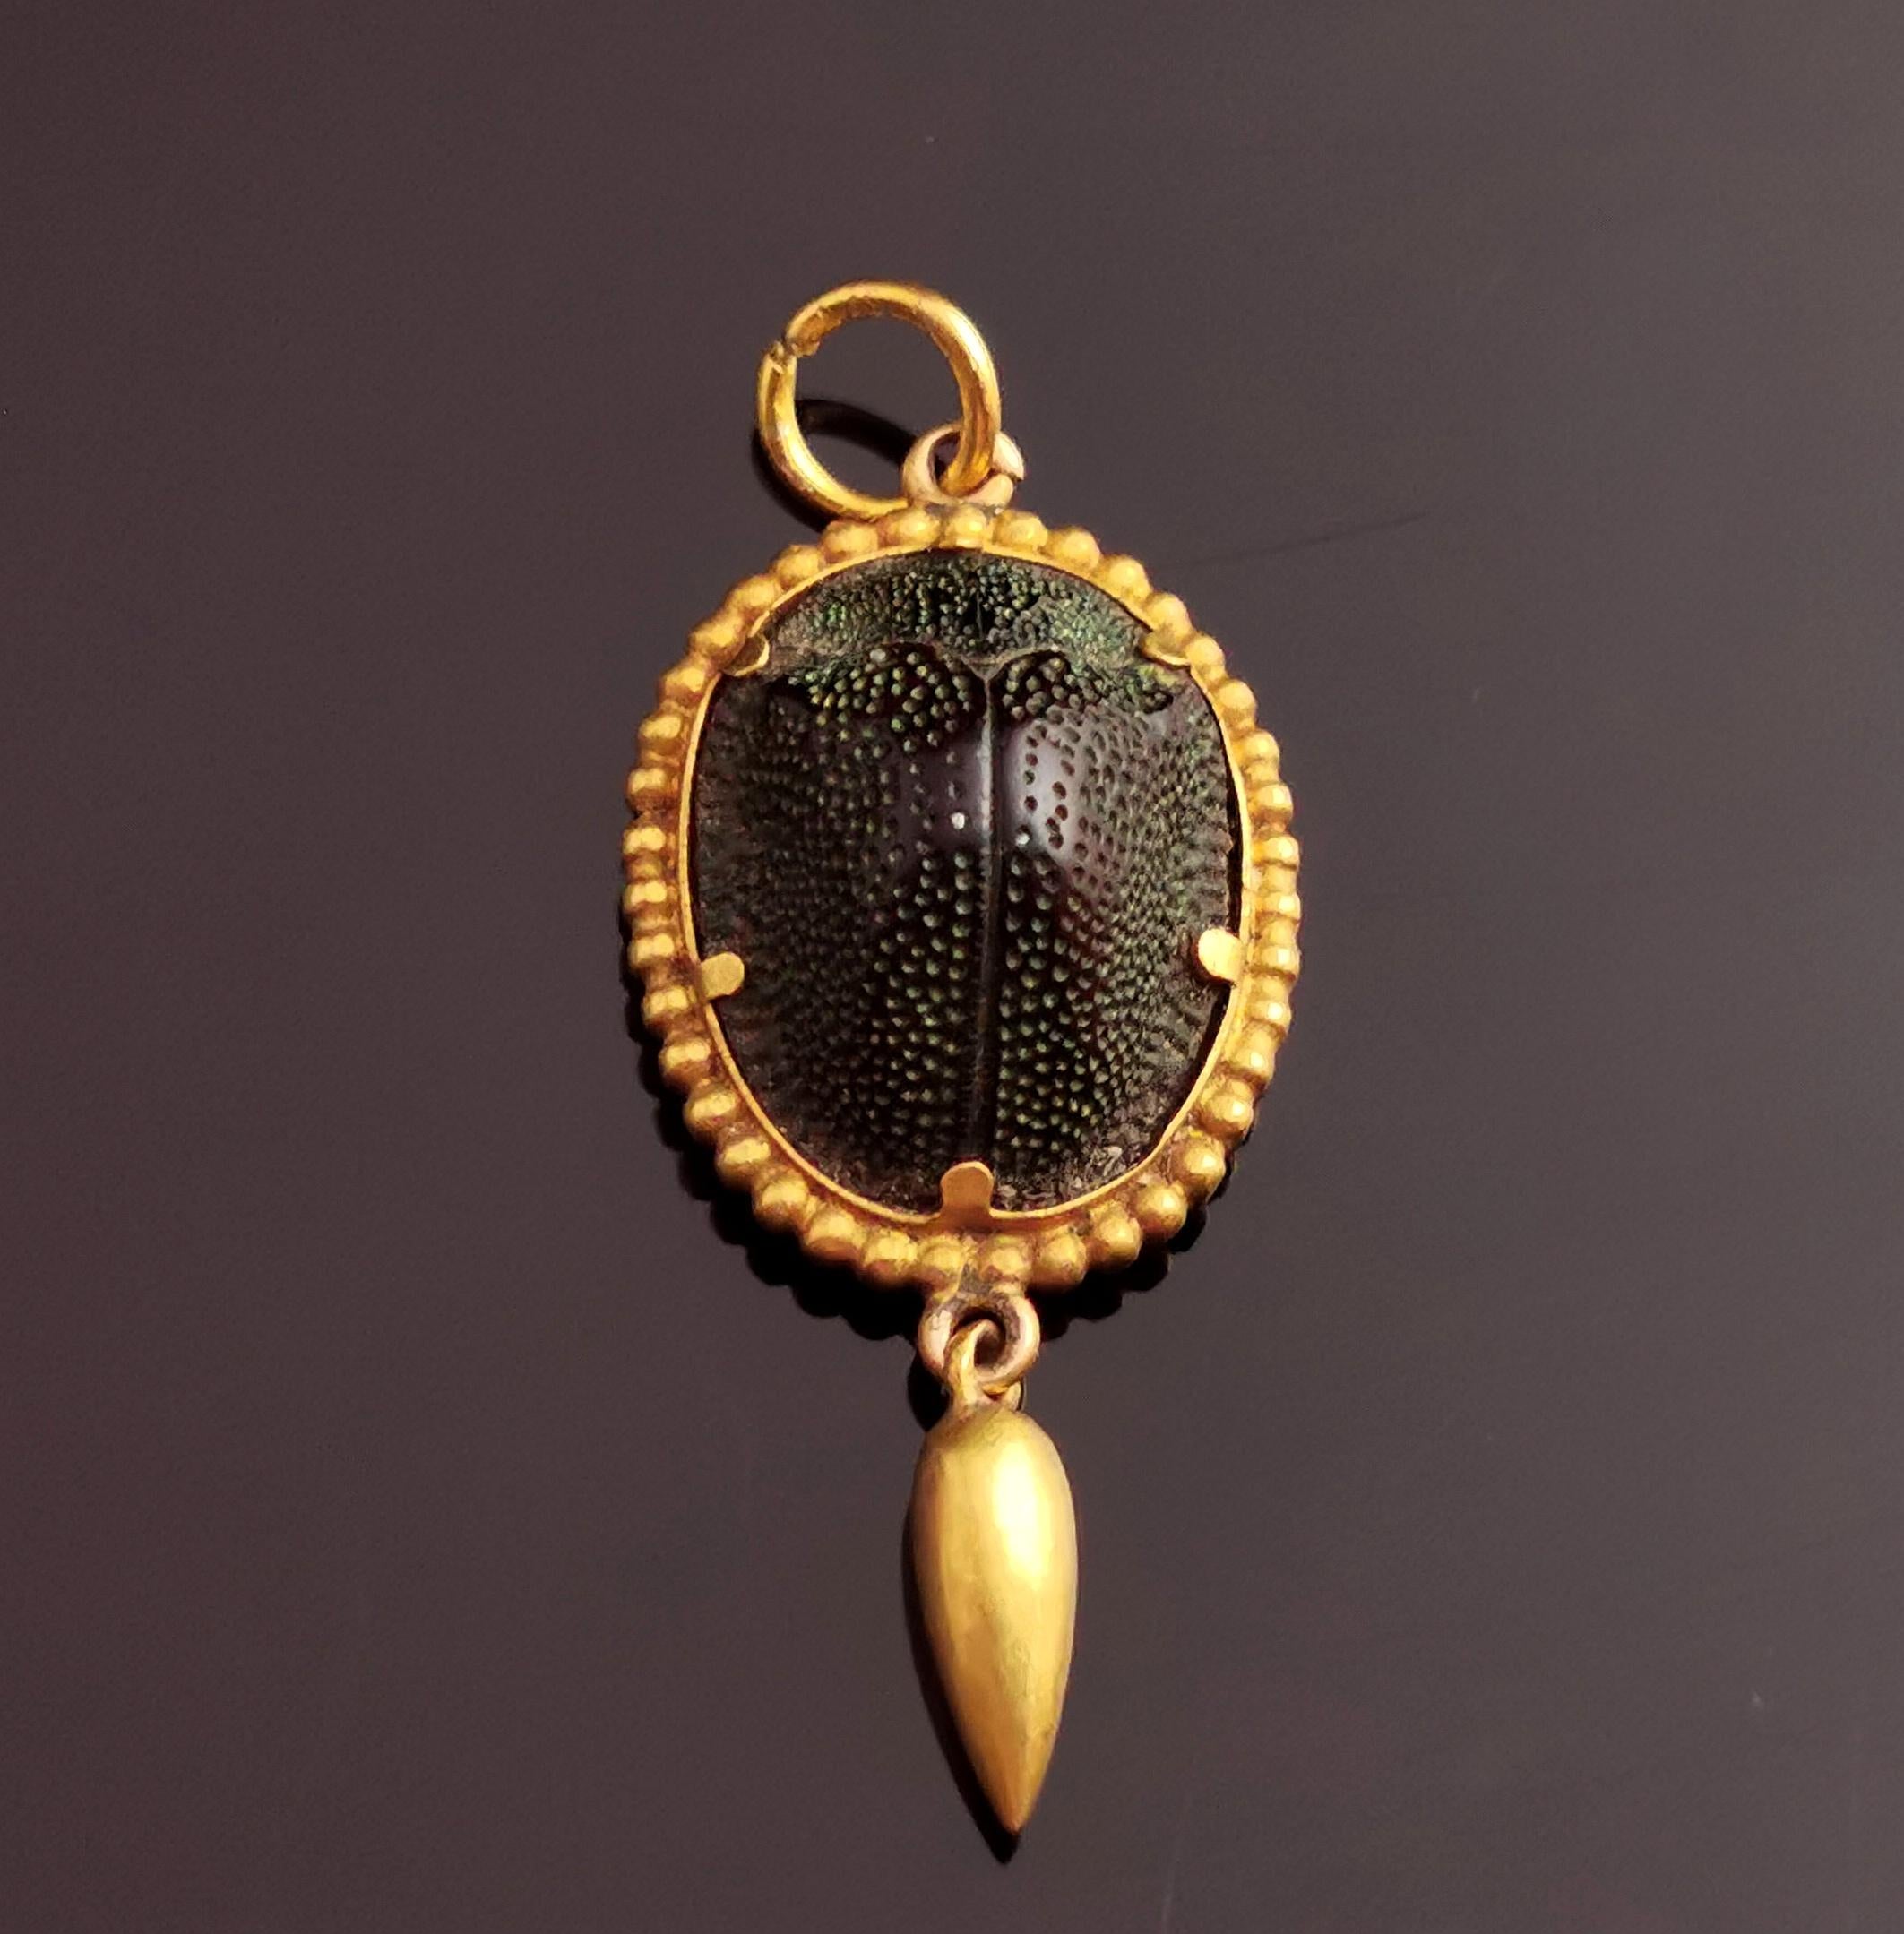 A beautiful antique Victorian scarab beetle drop pendant.

It is made from 15kt bloomed gold and houses a real iridescent green scarab beetle set into the beaded gold setting.

The pendant has an articulated drop which gives it a little movement and